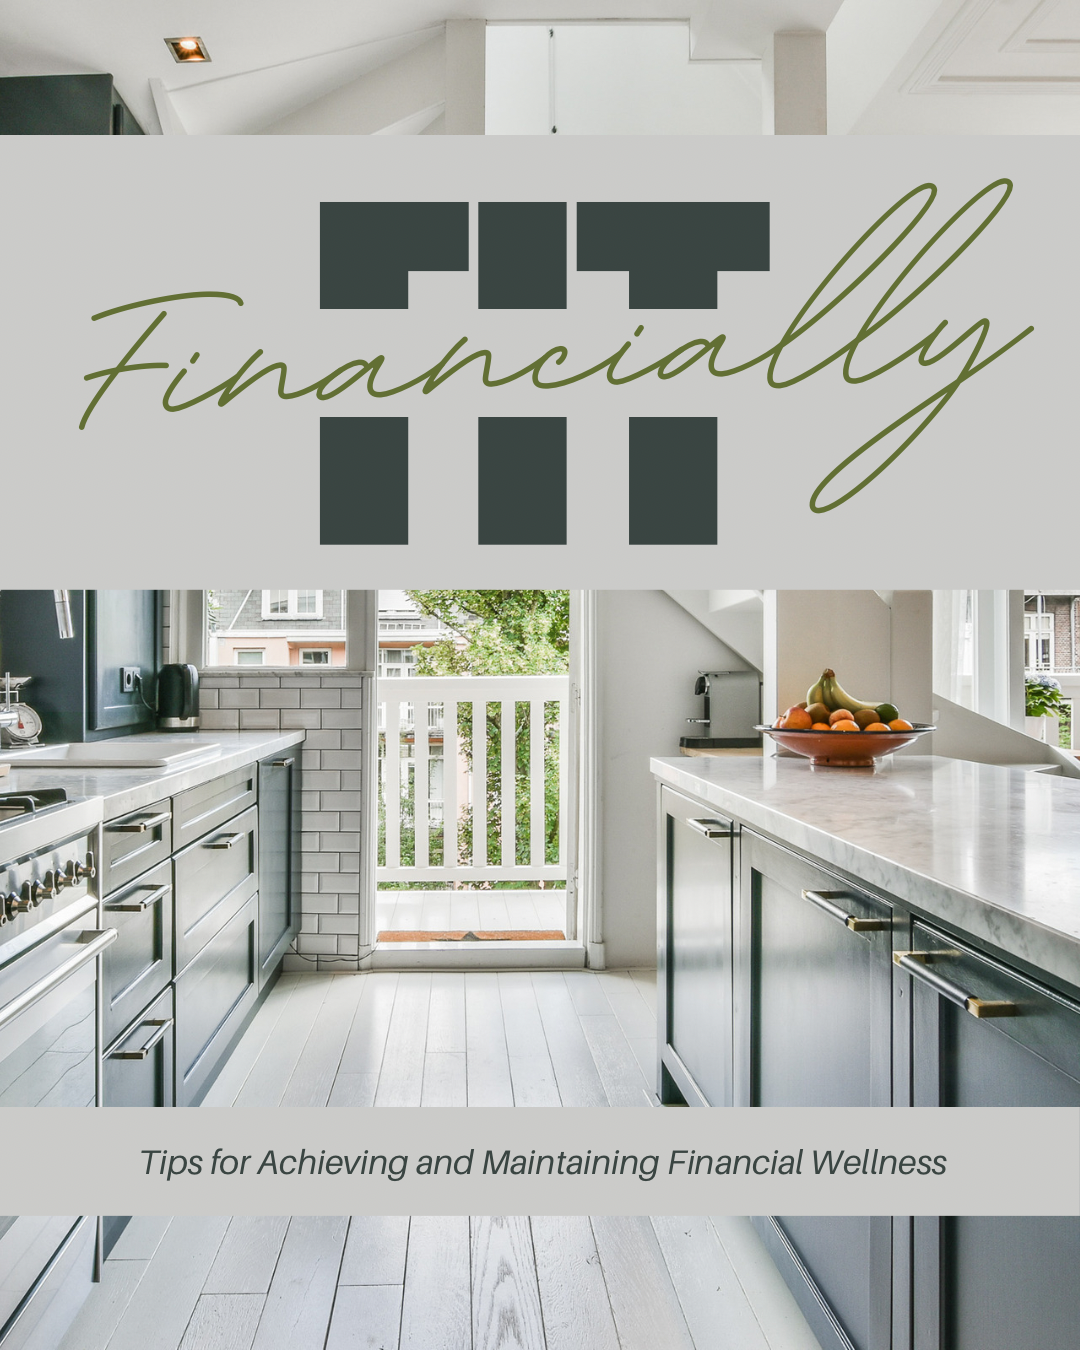 Financially Fit: Tips for Achieving and Maintaining Financial Wellness